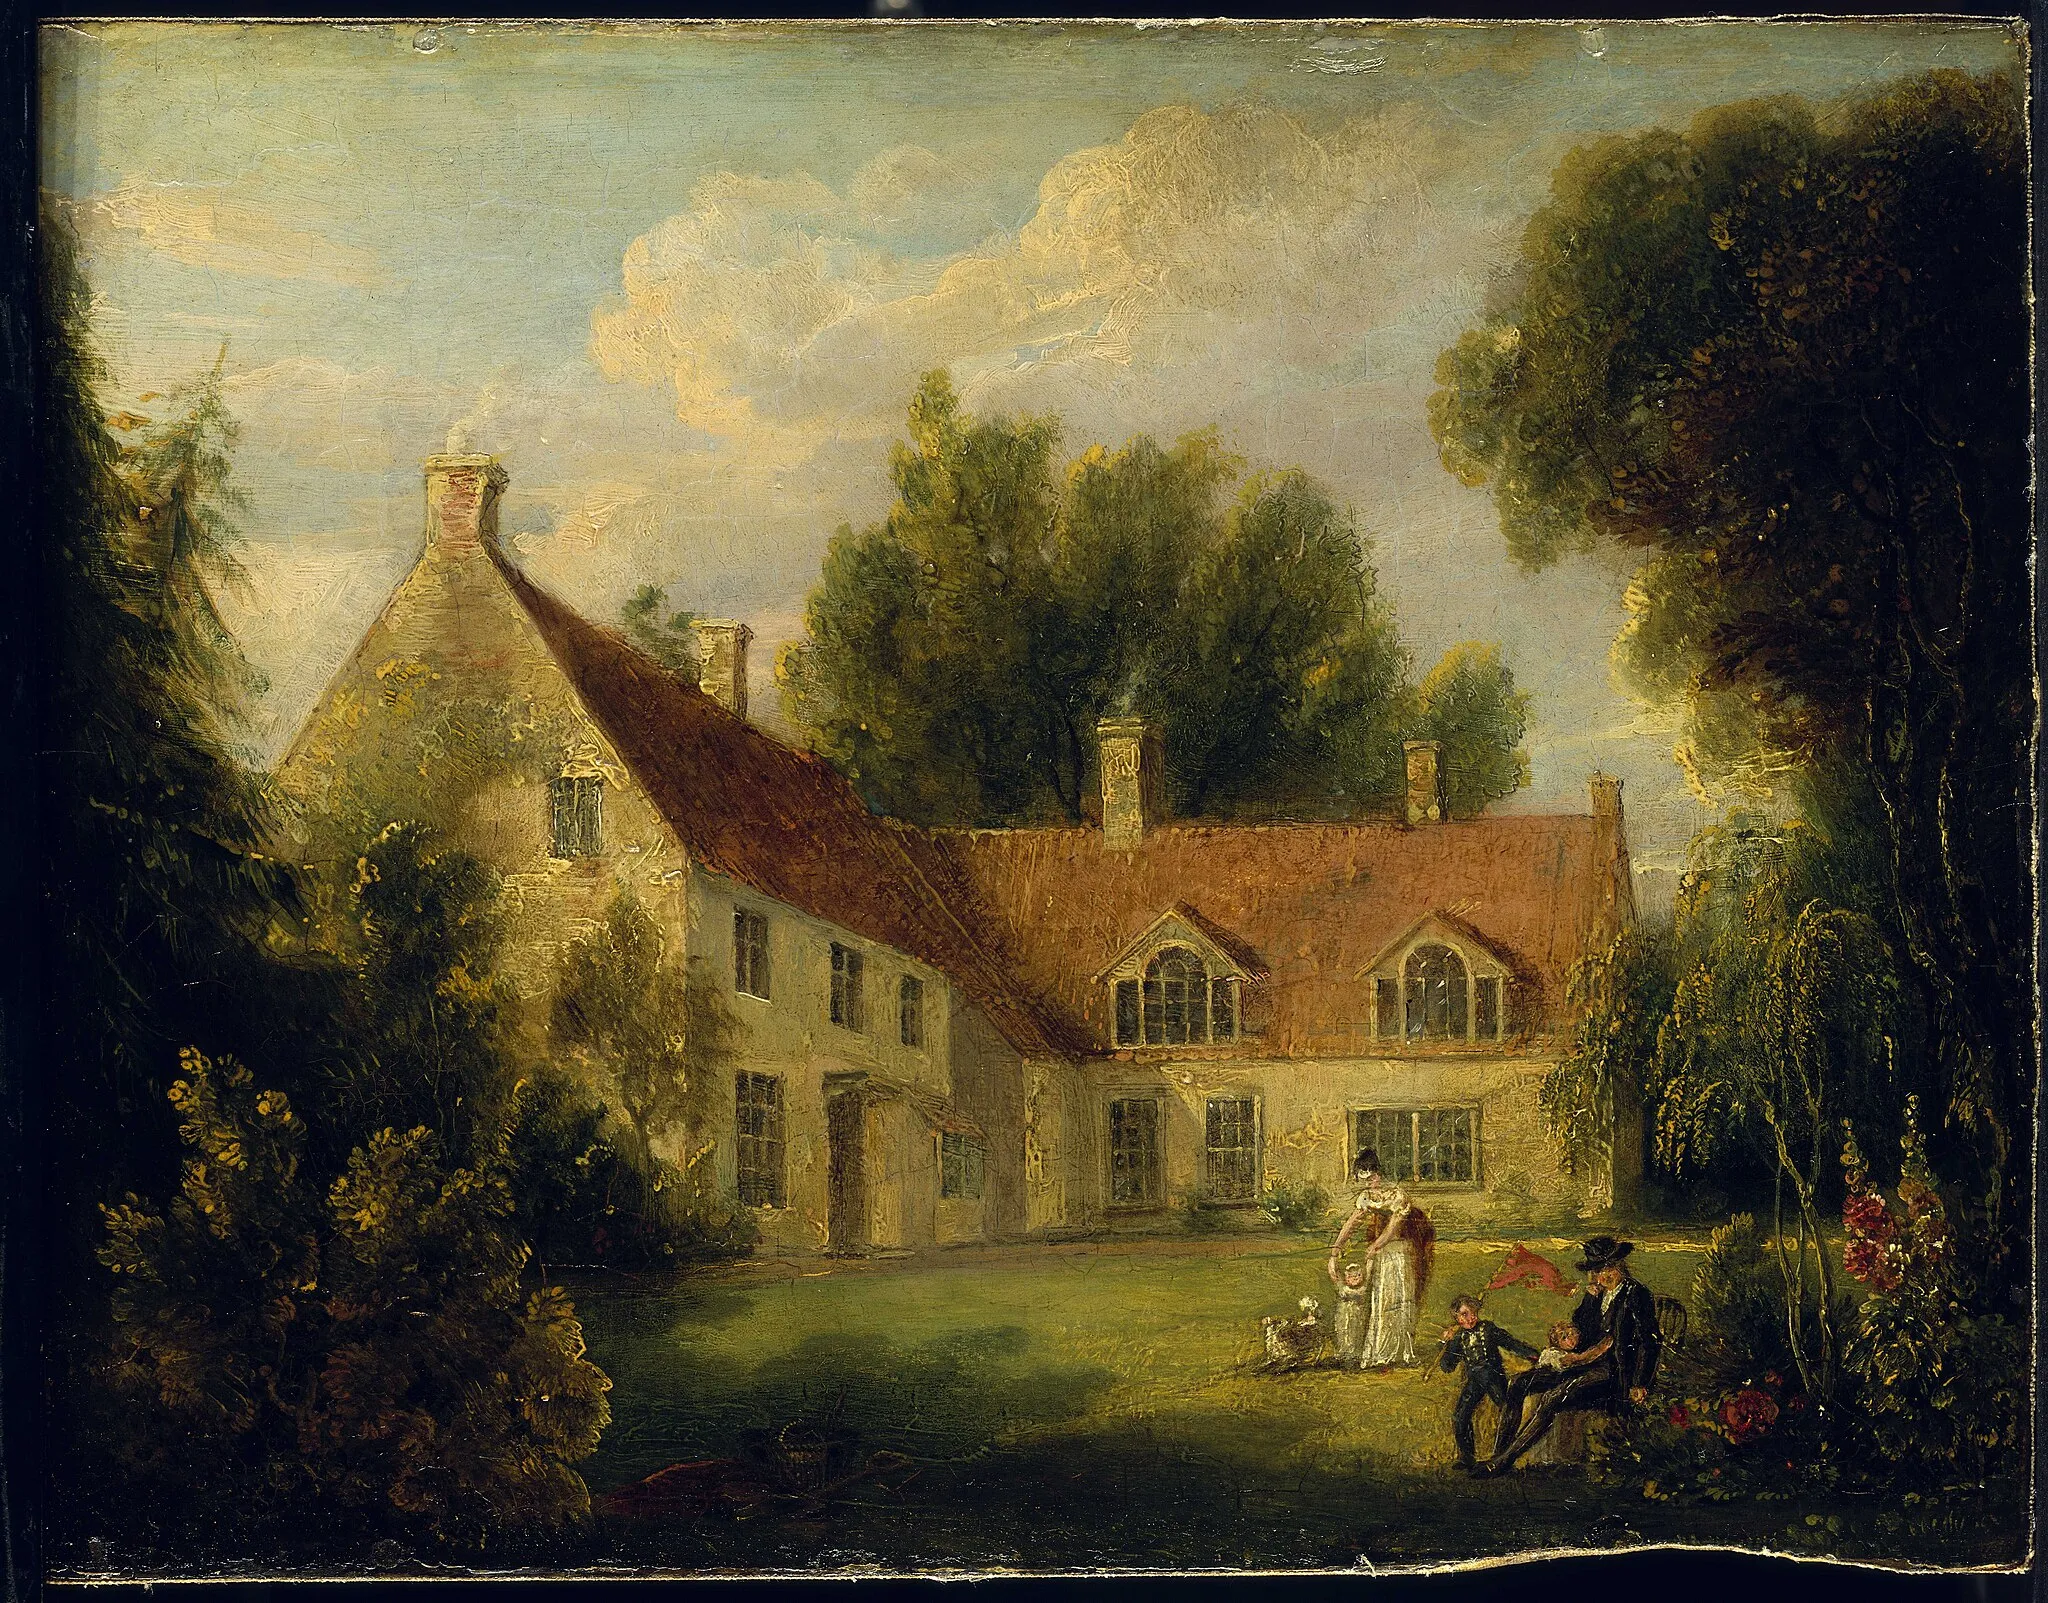 Photo showing: The Rectory, Burnham Thorpe, Norfolk Apparently the source of the engraving of Nelson's birthplace, entitled on the plate 'The Parsonage House of Burnham Thorpe' (see PAF4316), which appeared in the first volume of Clarke and McArthur's 'Life of Nelson' (1809). There has been longstanding confusion about the artist, whose name is given as 'F. Pocock' on the plate and has been expanded in various sources to 'Francis Pocock', though apparently otherwise unknown. Clarke and McArthur's index clearly states the image was painted by 'J. Pocock' from an 'exact drawing in possession of Earl Nelson', the admiral's elder brother, William. Allowing the traditional interchangeability of 'I' and 'J' this can only indicate Isaac Pocock, the painter son of Nicholas, the marine artist, who himself did much work for their book: 'F' on the plate is therefore probably just a slip. The house itself had been two large cottages, knocked together. It was bitterly cold in winter and was demolished in 1802.  The drawing on which this view was based has not been located and BHC1771 is another oil on panel version, of uncertain authorship, with the same imagined Nelson family group in the foreground. In this young Horatio is presumably the boy dressed in blue with a red flag, with his parents and a sibling. Isaac Pocock (1782-1835) trained as a portraitist under Romney and Beechey but also did historical compositions. He exhibited at the Royal Academy, the British Institution and the Liverpool Academy, but from 1809 turned to playwriting, at which he had considerable success. In 1818 his inheritance of the Maidenhead estate of his former sea-captain uncle, Sir Isaac, ended his painting career but he continued writing popular drama to his death. PvdM 5/05
The Rectory, Burnham Thorpe, Norfolk